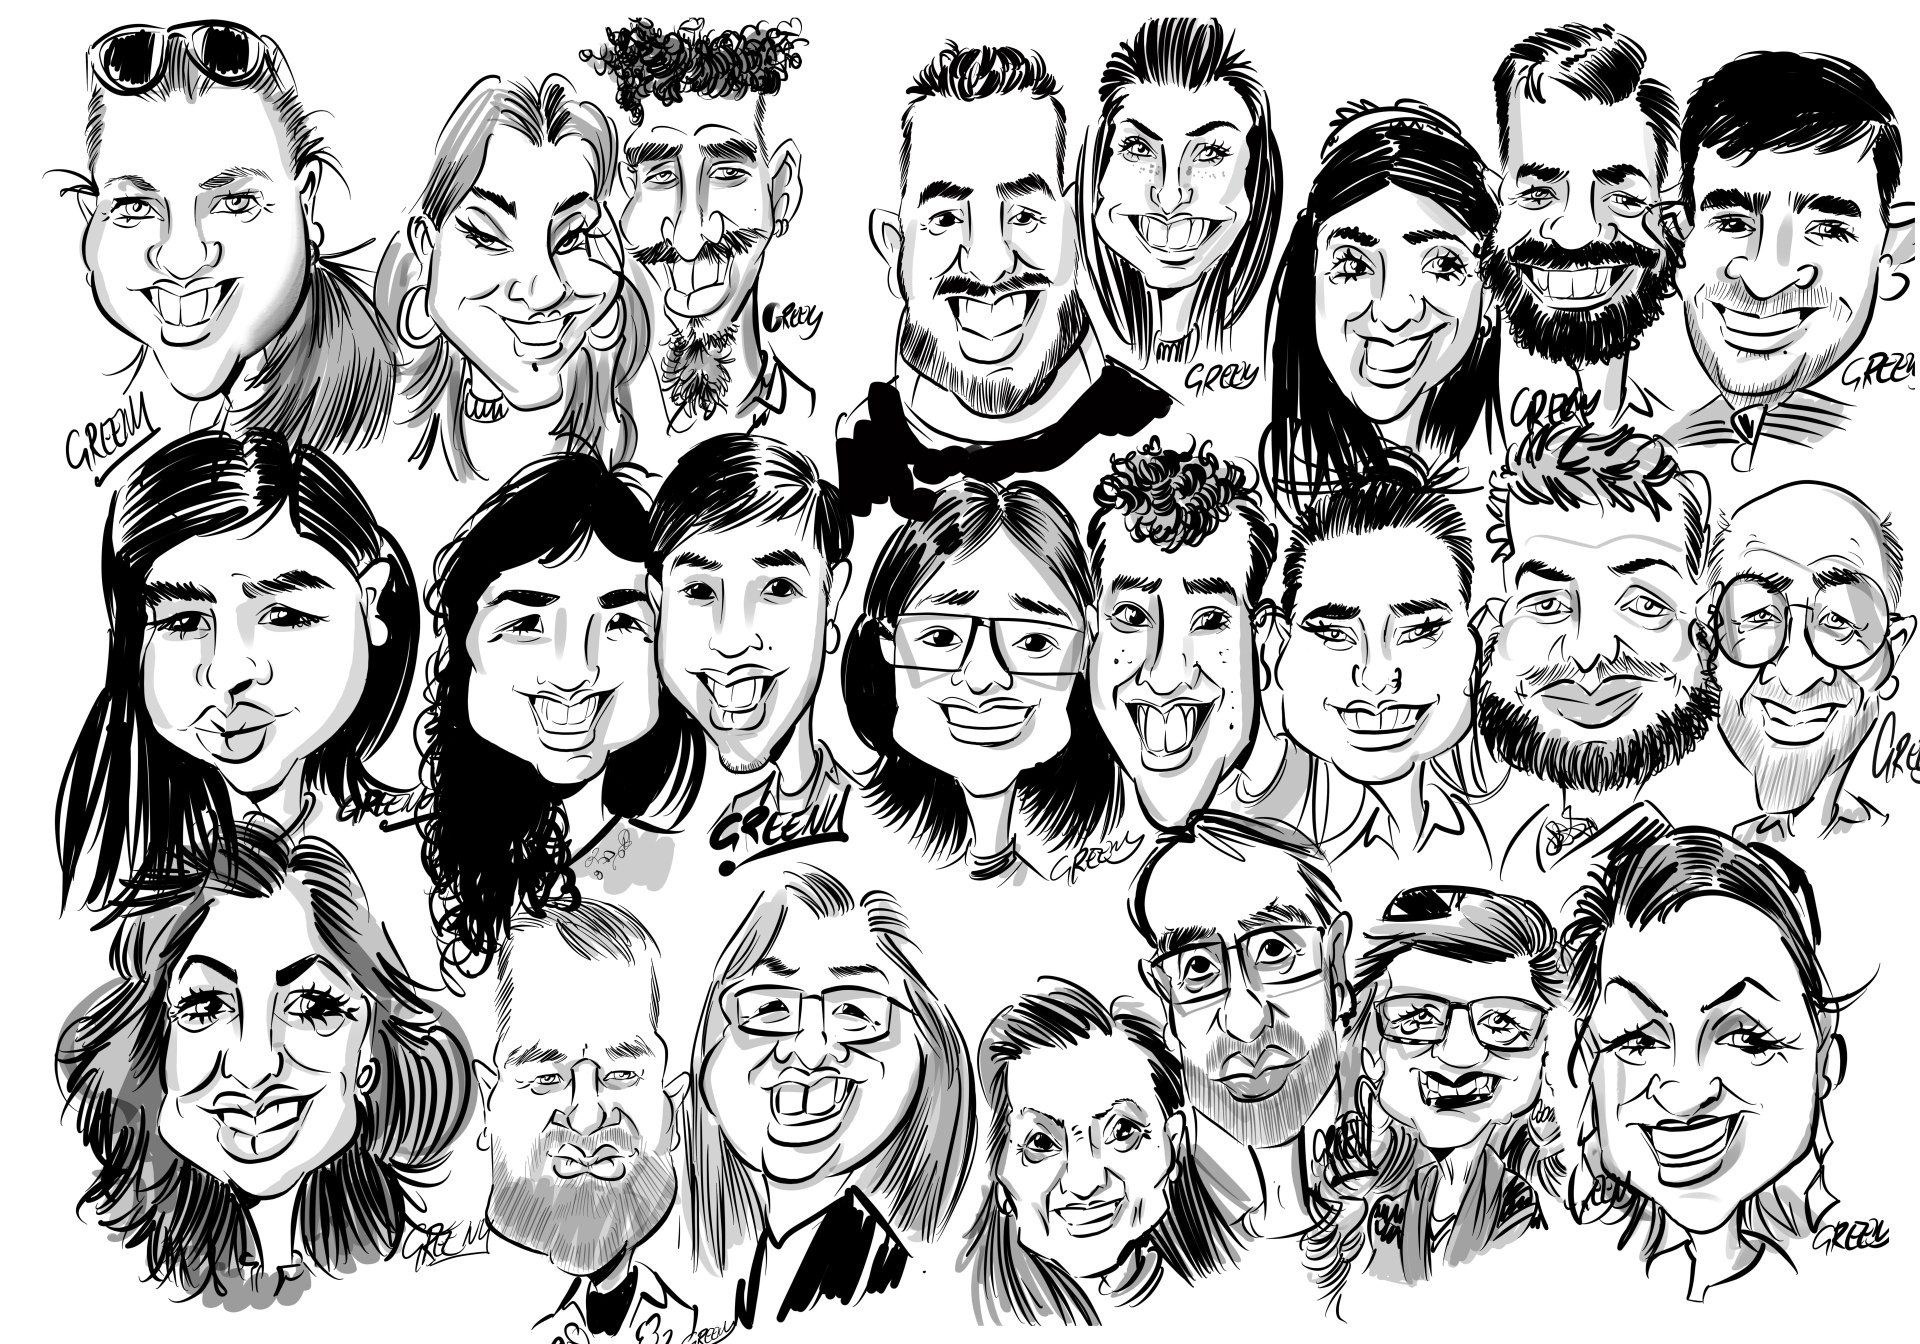 Live black and white digital caricatures with caricature cartoonist David Green